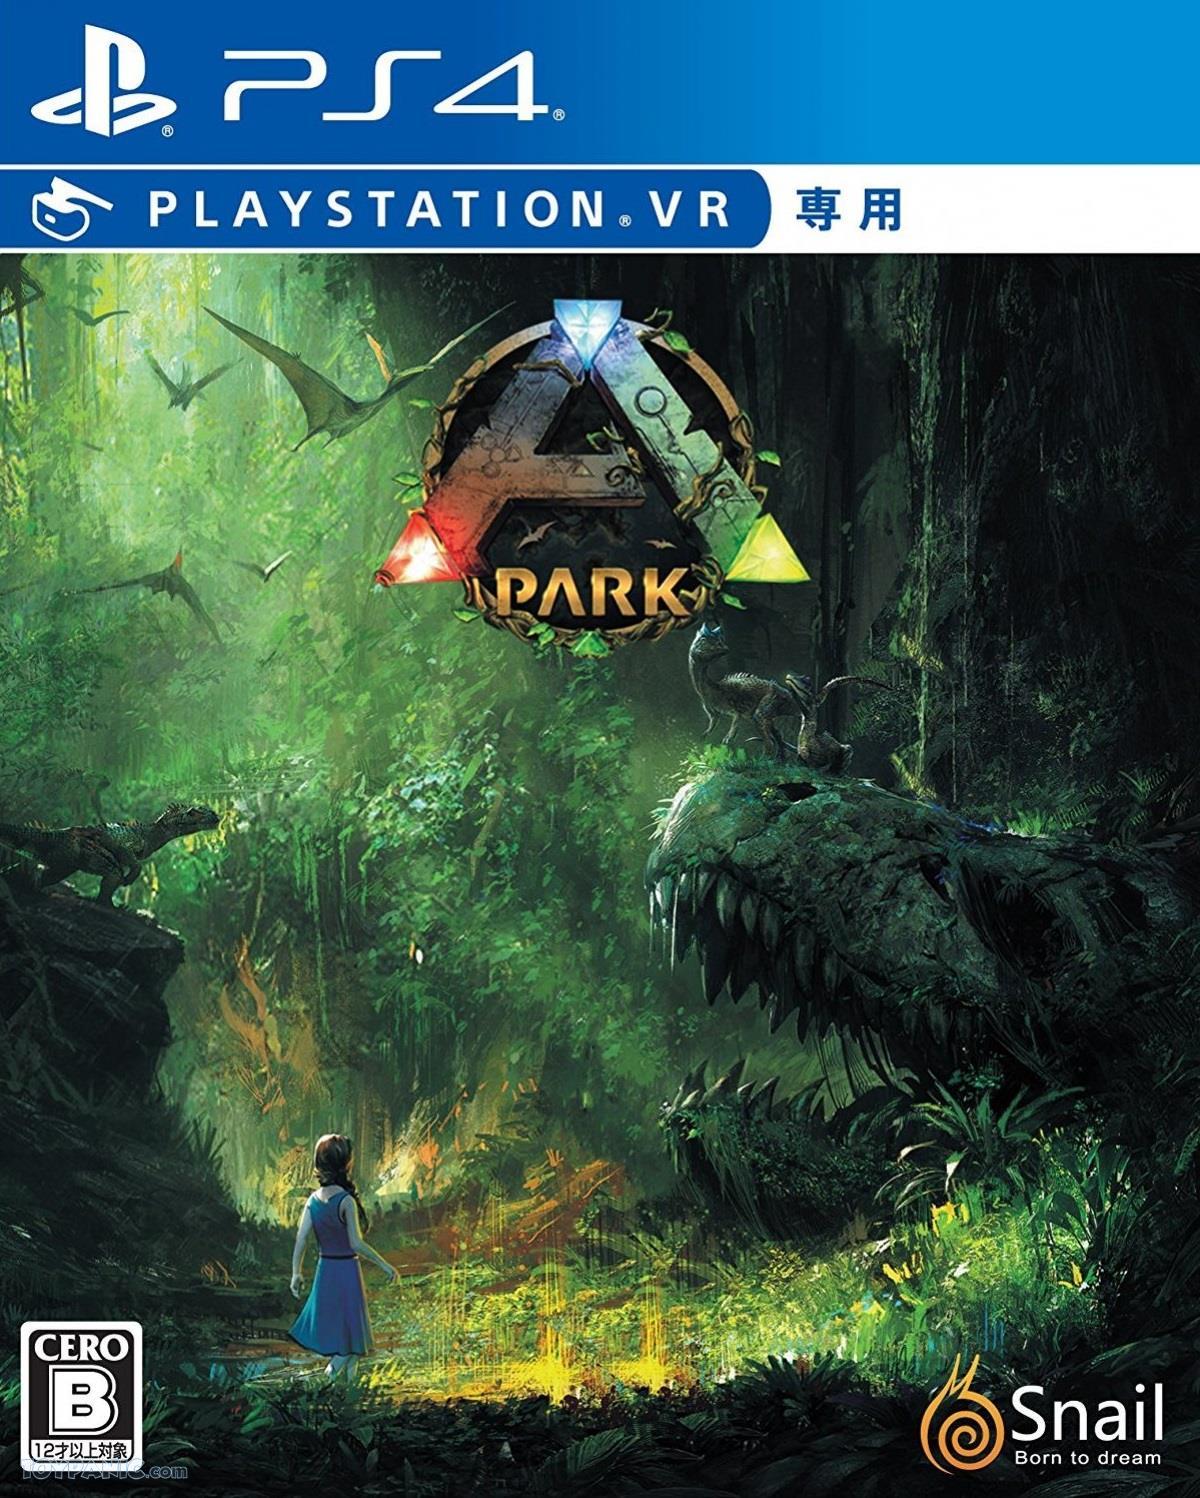 Psvr Ark Park Chinese English Version R3 Only Myr168 00 With 2x Panic Point